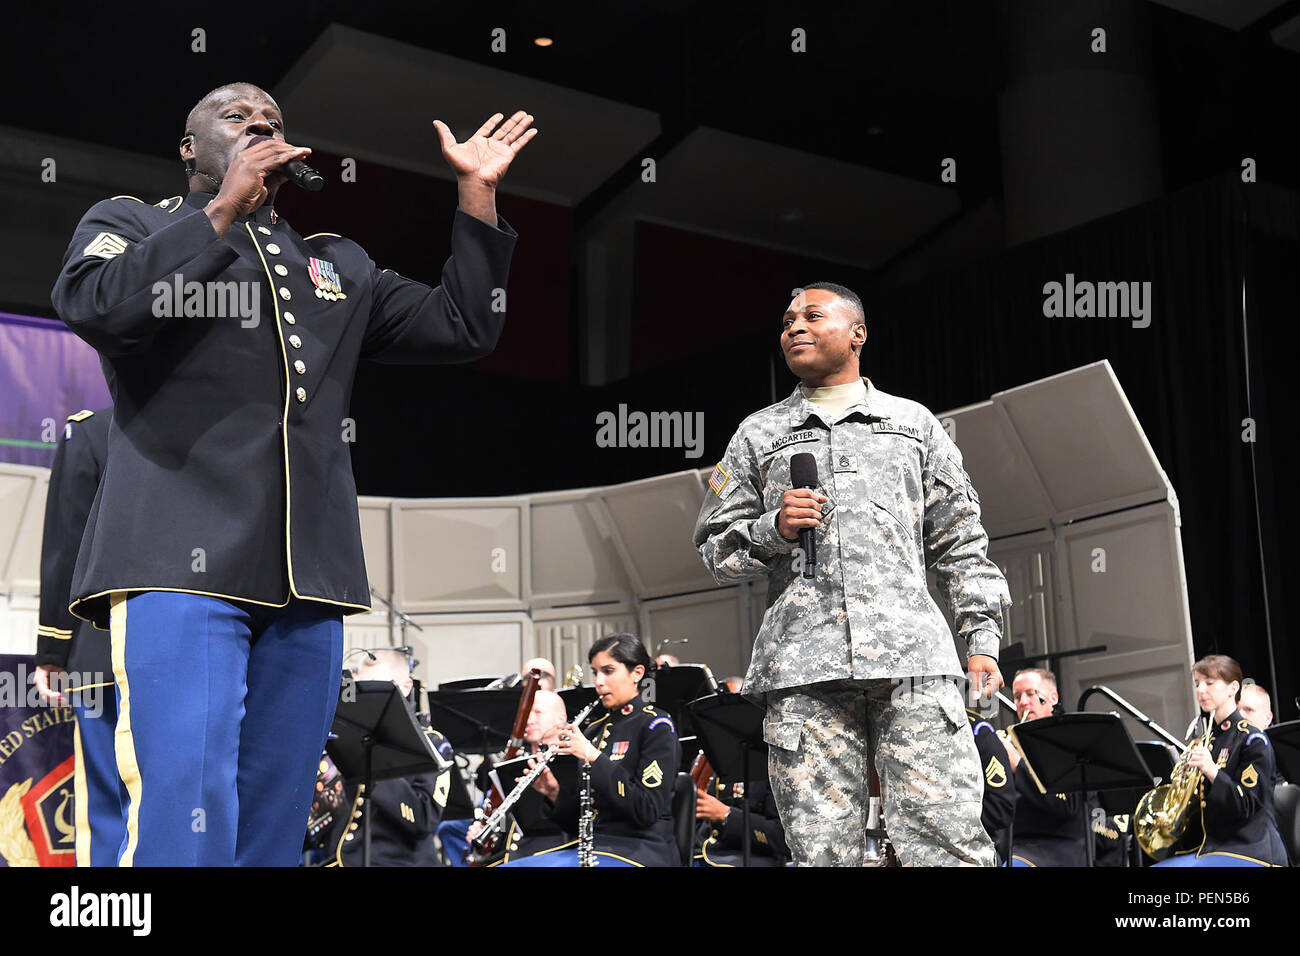 Army Sgt. Maj. Victor Cenales, left, and Staff Sgt. Keenan McCarter perform an upbeat jazz version of “Joy to the World” at the 69th Annual Midwest Clinic International Band, Orchestra and Music Conference held at the McCormick Place West in Chicago, Dec. 16. All Army band members go through basic training and then experience a rigorous audition before being hand-selected to join the U.S. Army Field Band in the Military Occupational Specialty (MOS) 42-Sierra (Army Musician). There are 60 members in the band and 29 chorus members. (U.S. Army photo by Spc. David Lietz/Released) Stock Photo